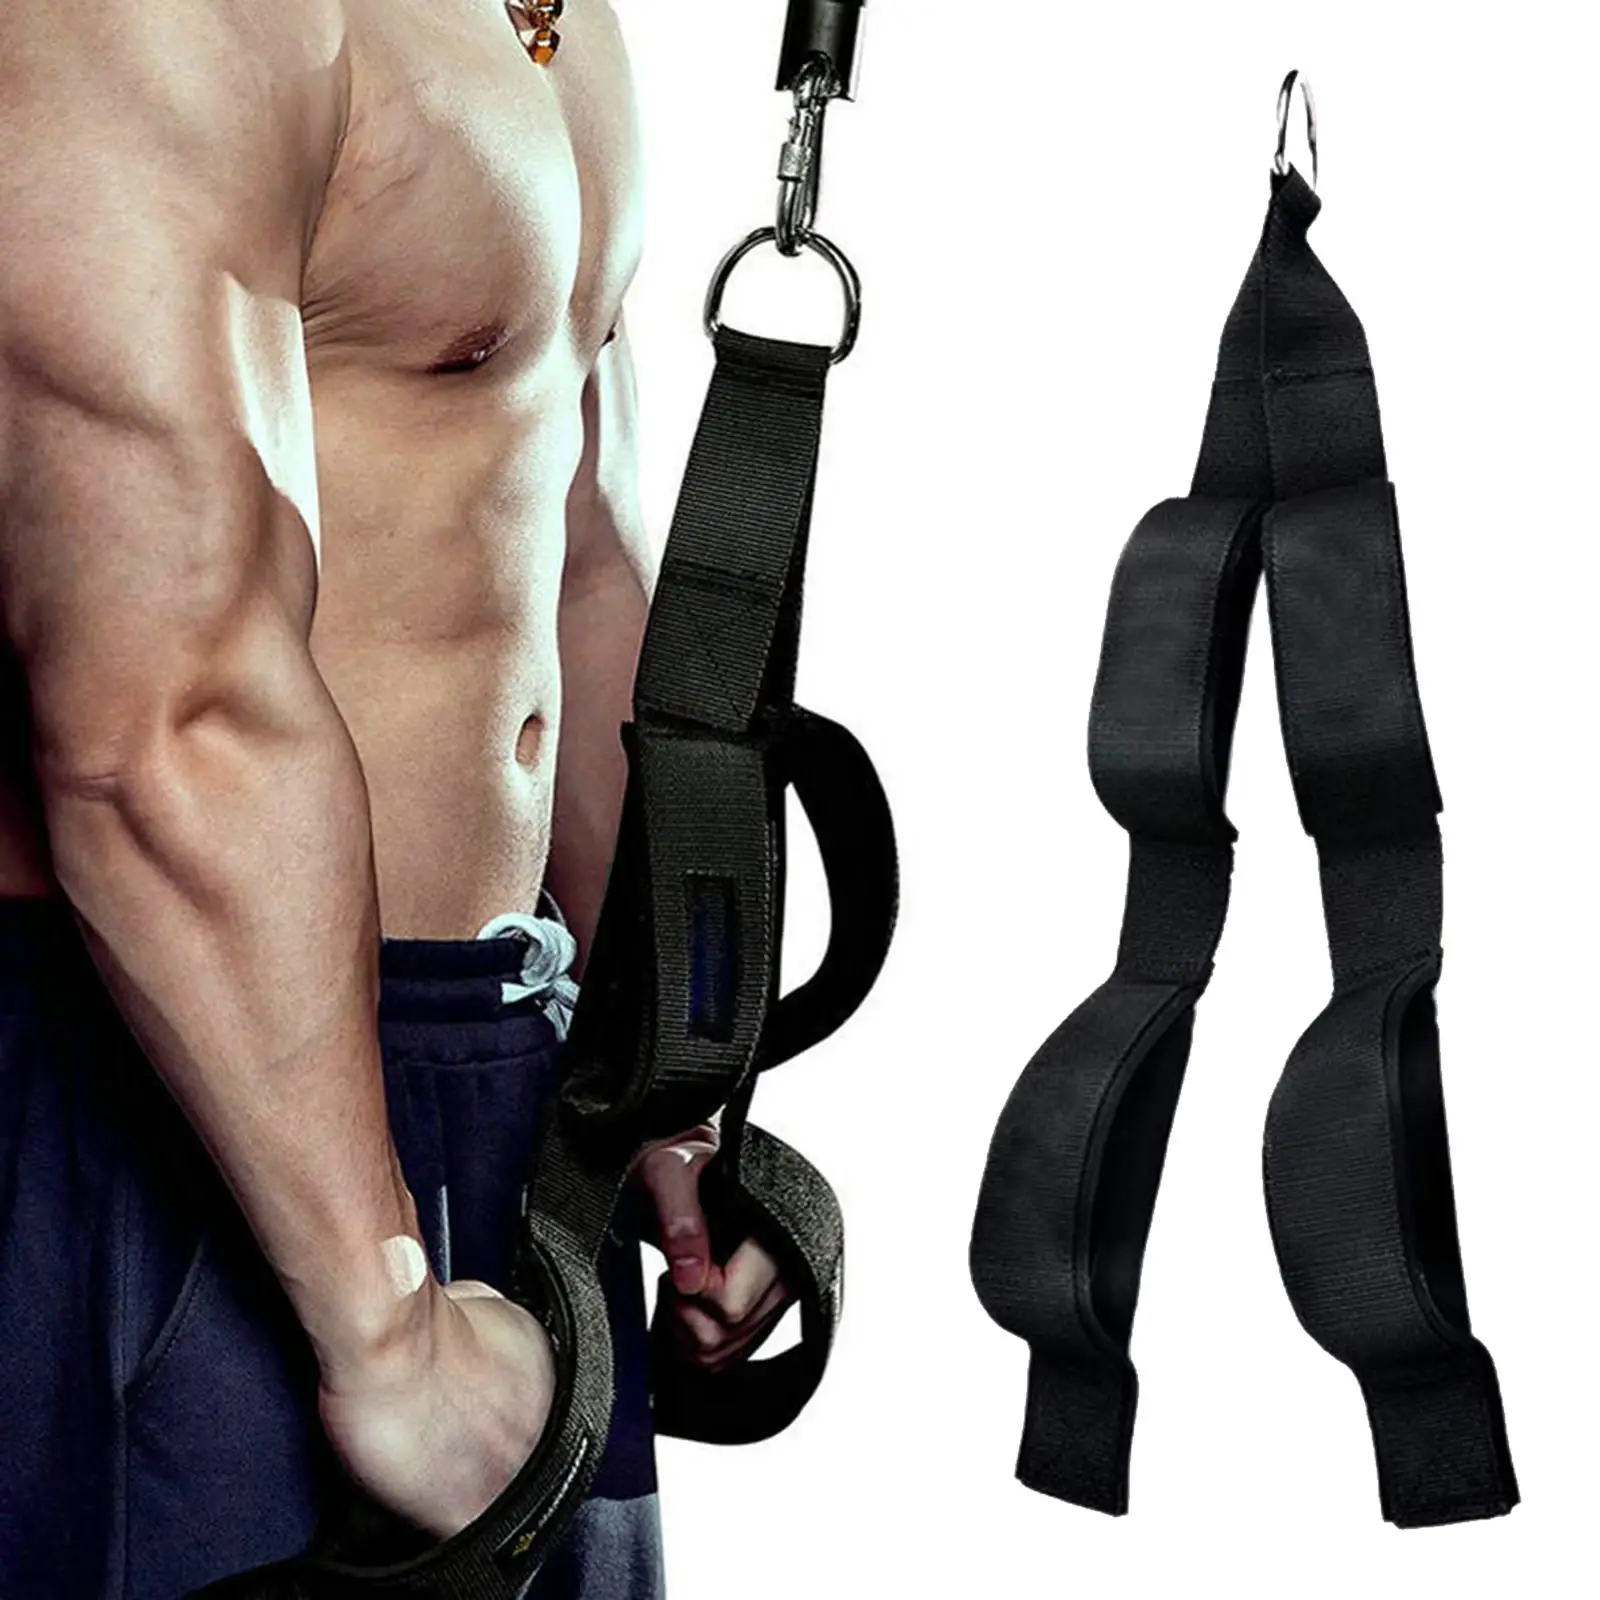 Tricep Rope Cable Attachment Pully for Strength Abdominal Training Workout